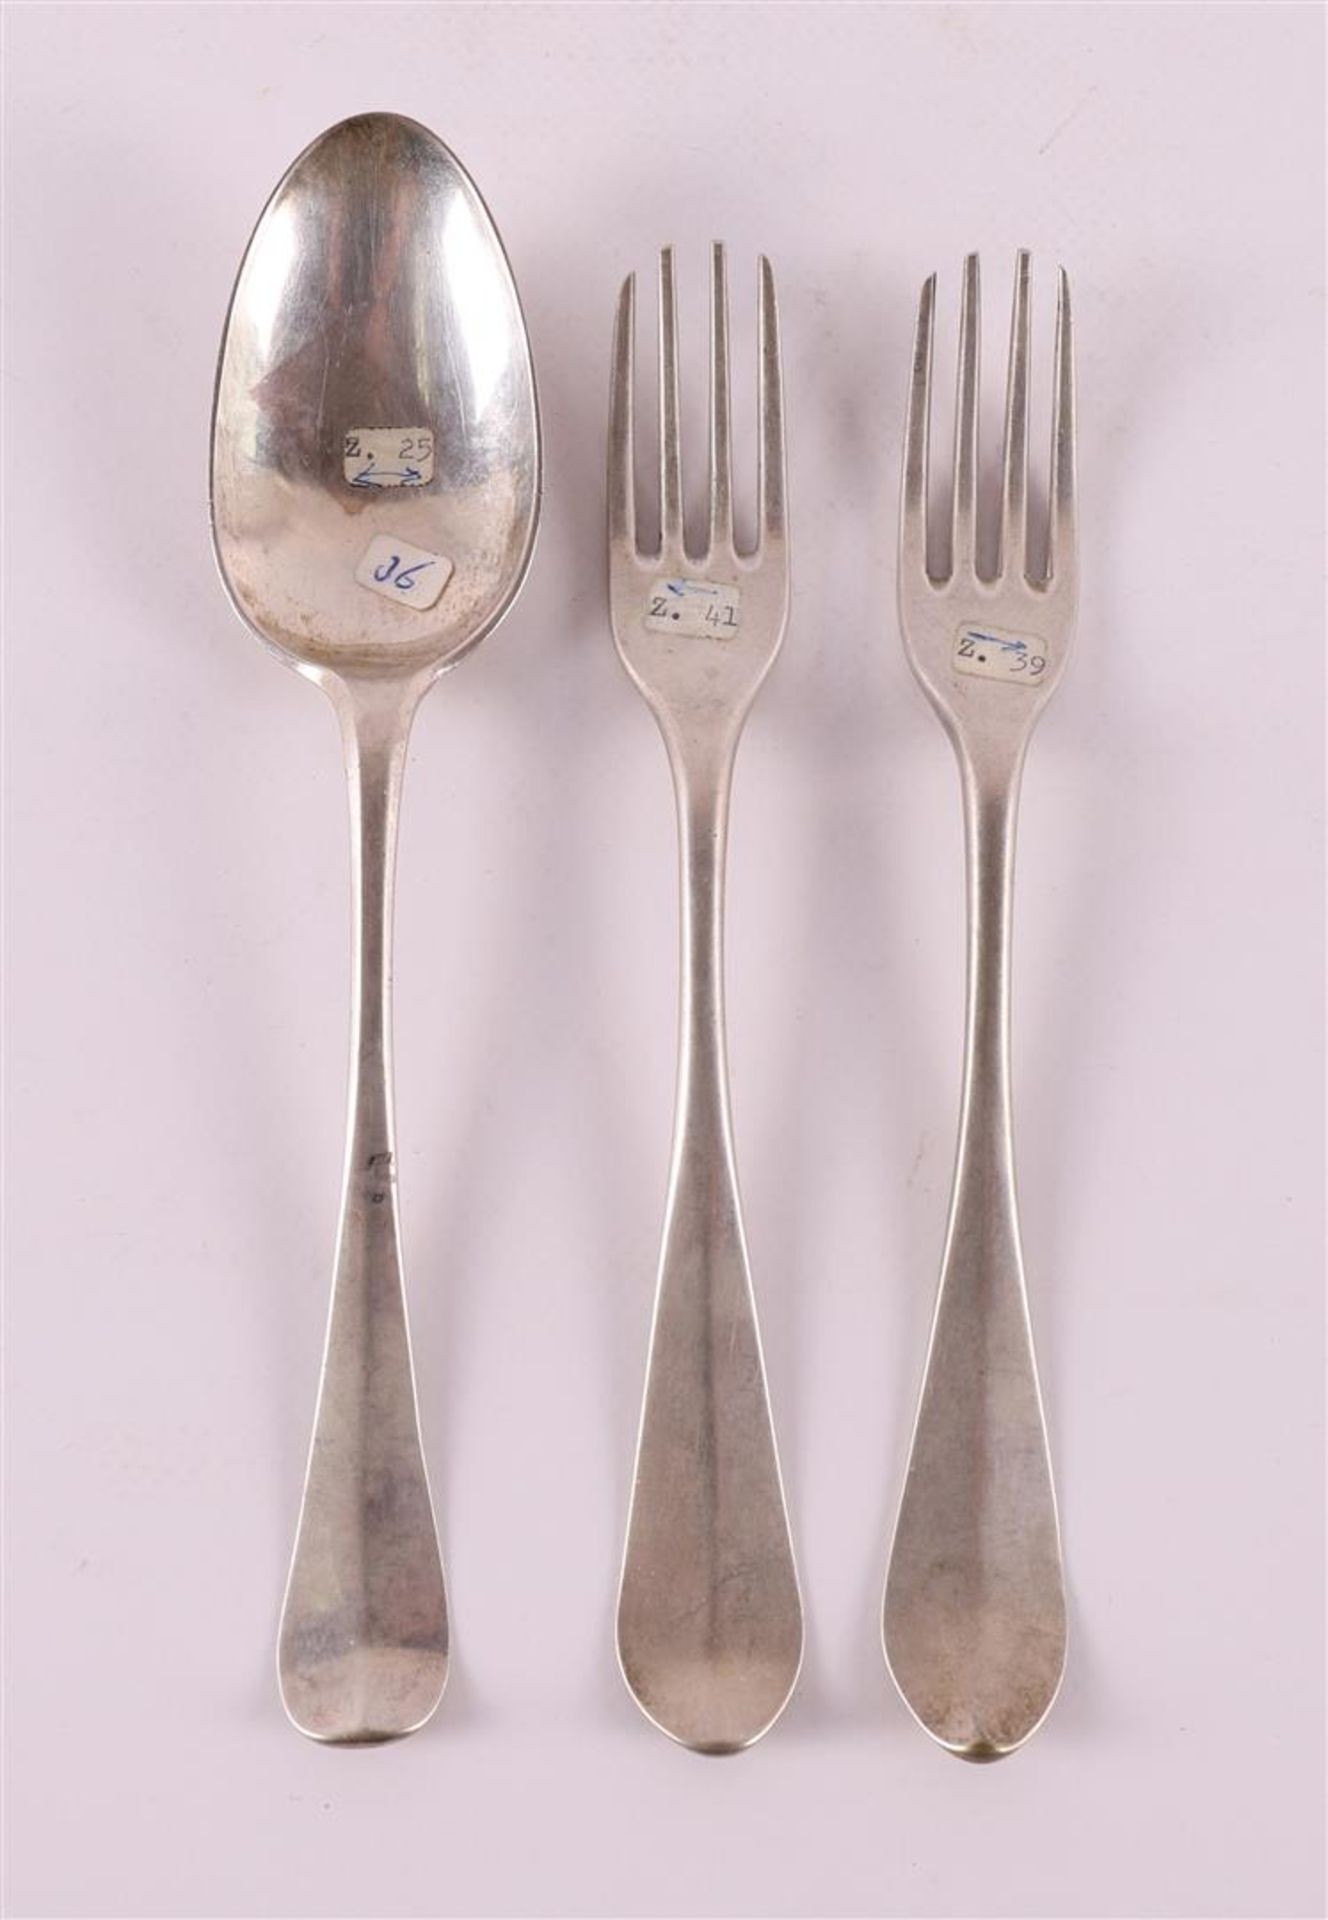 A 2nd grade 835/1000 silver spoon and two forks, Groningen 18th century.